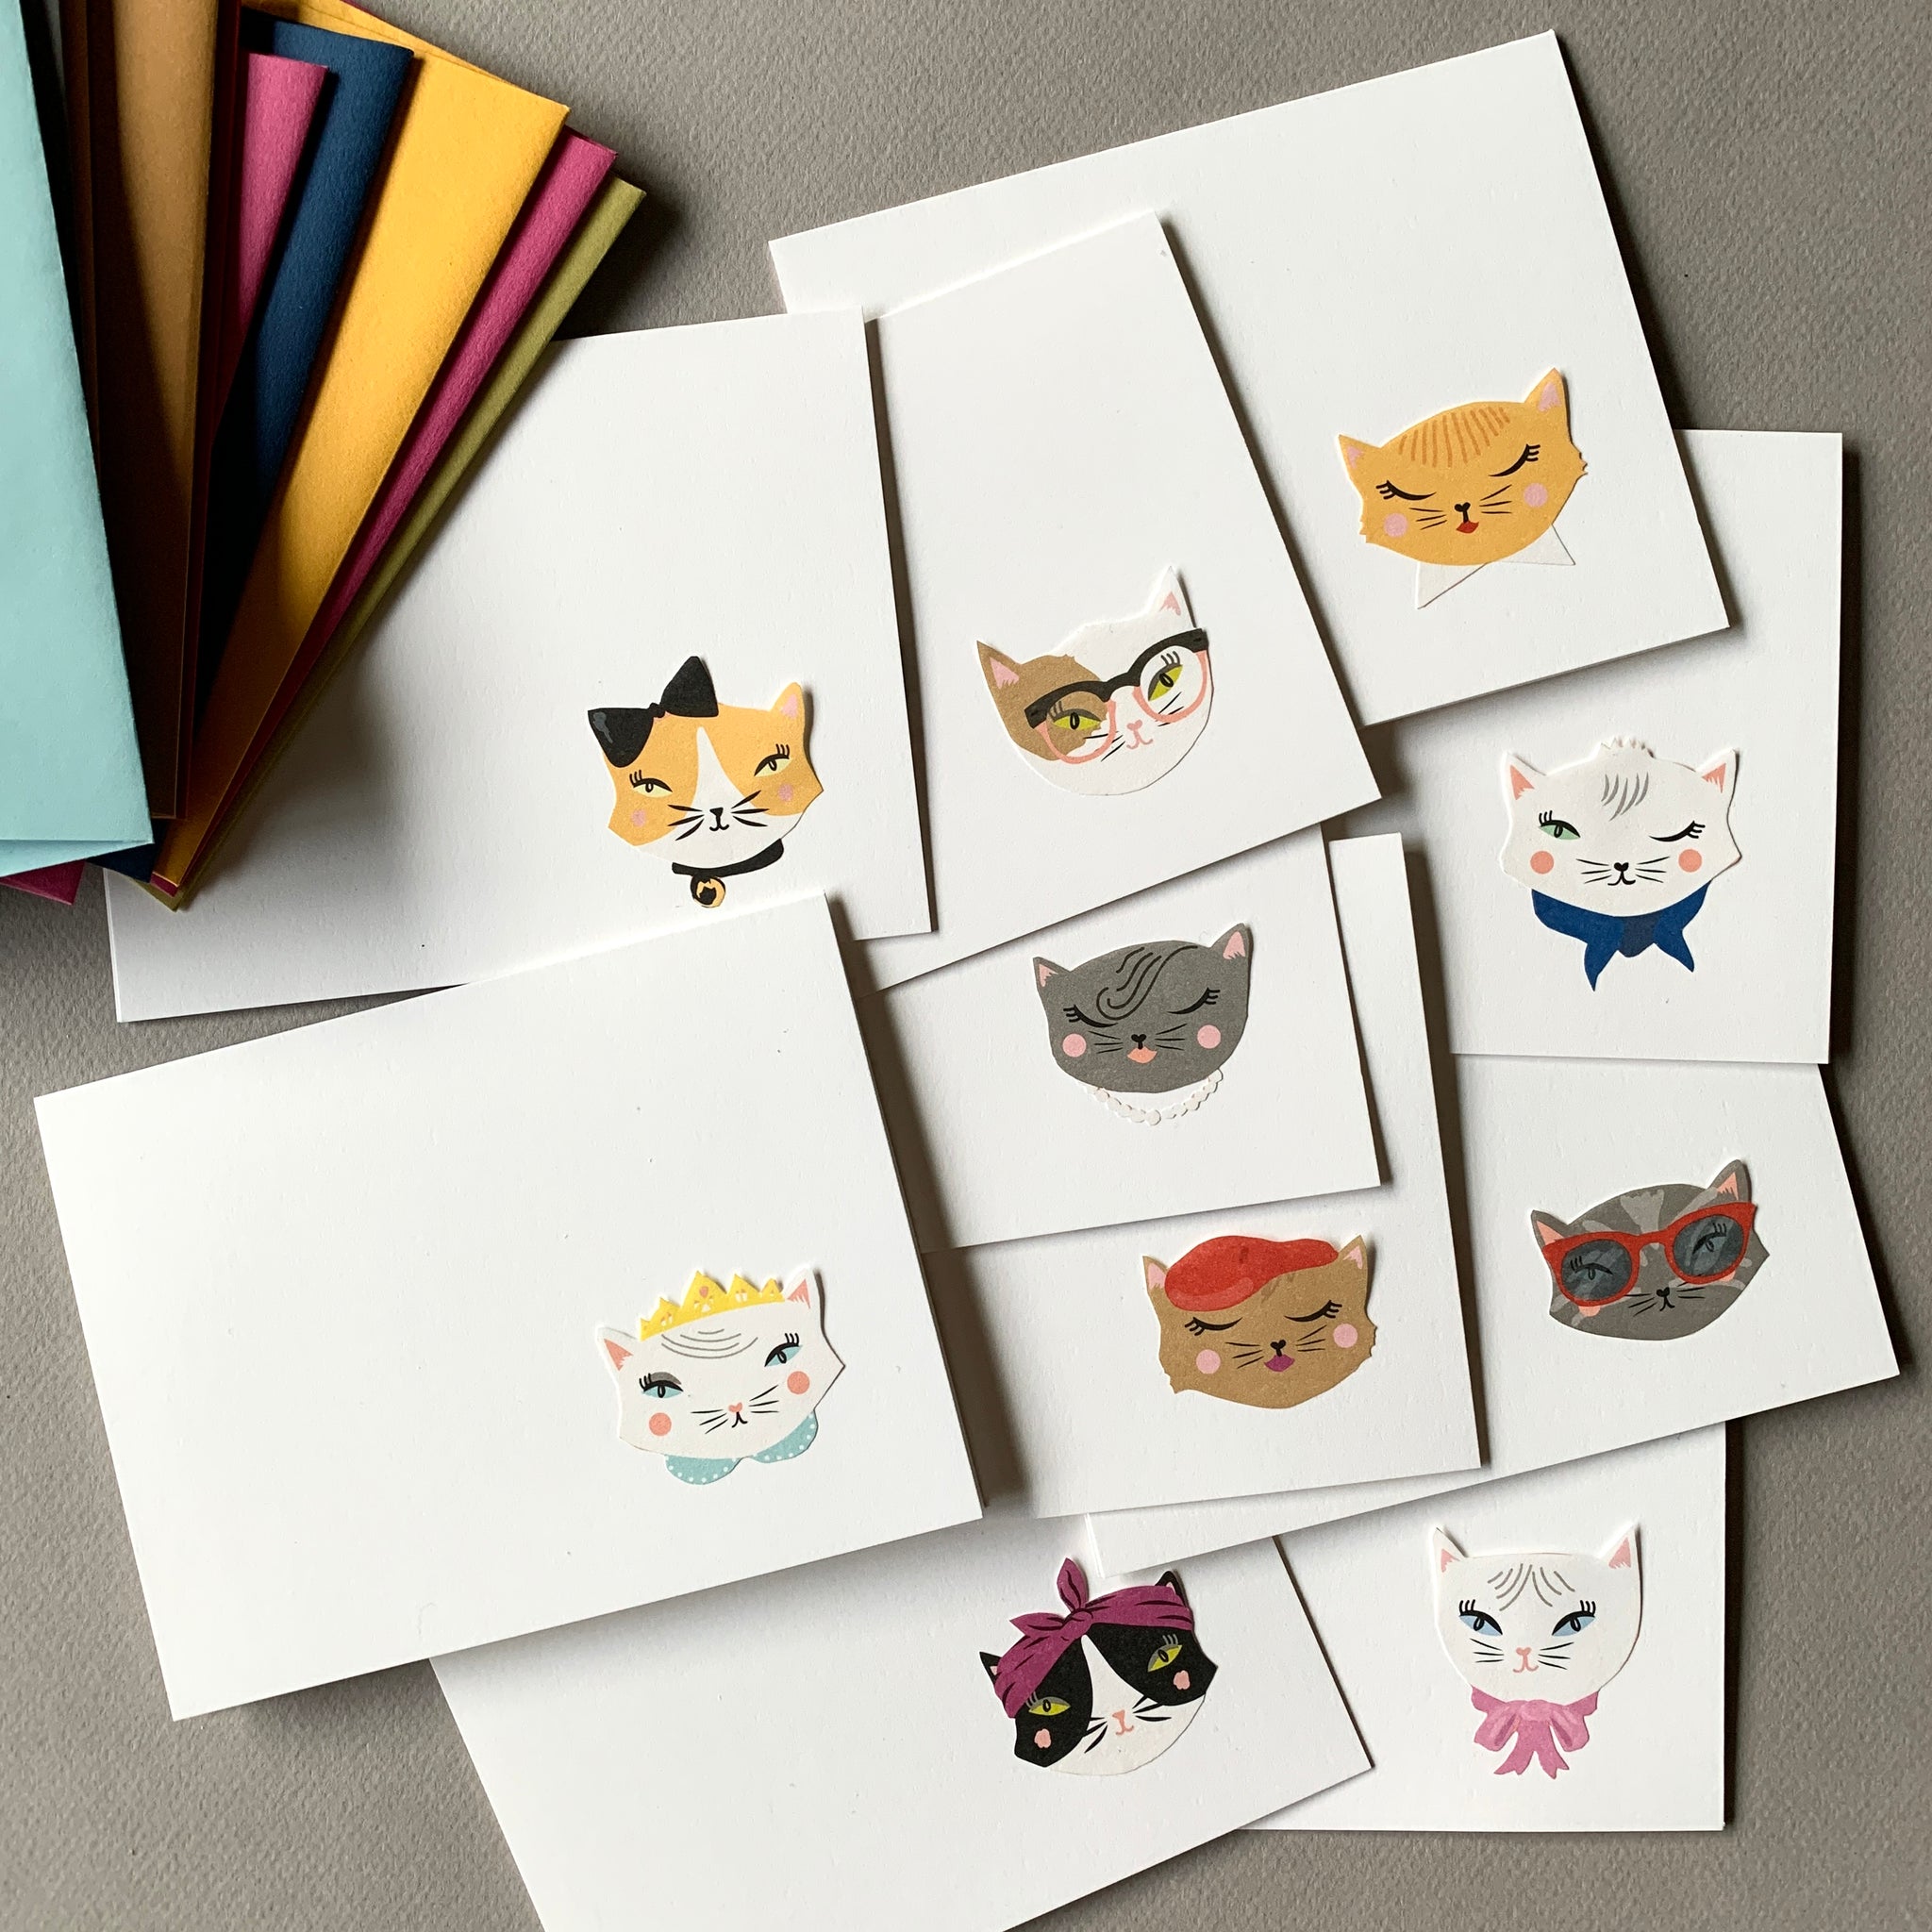 Box of 10 Cool Cattitude Cards with Lined Envelopes - Handcrafted Stationery